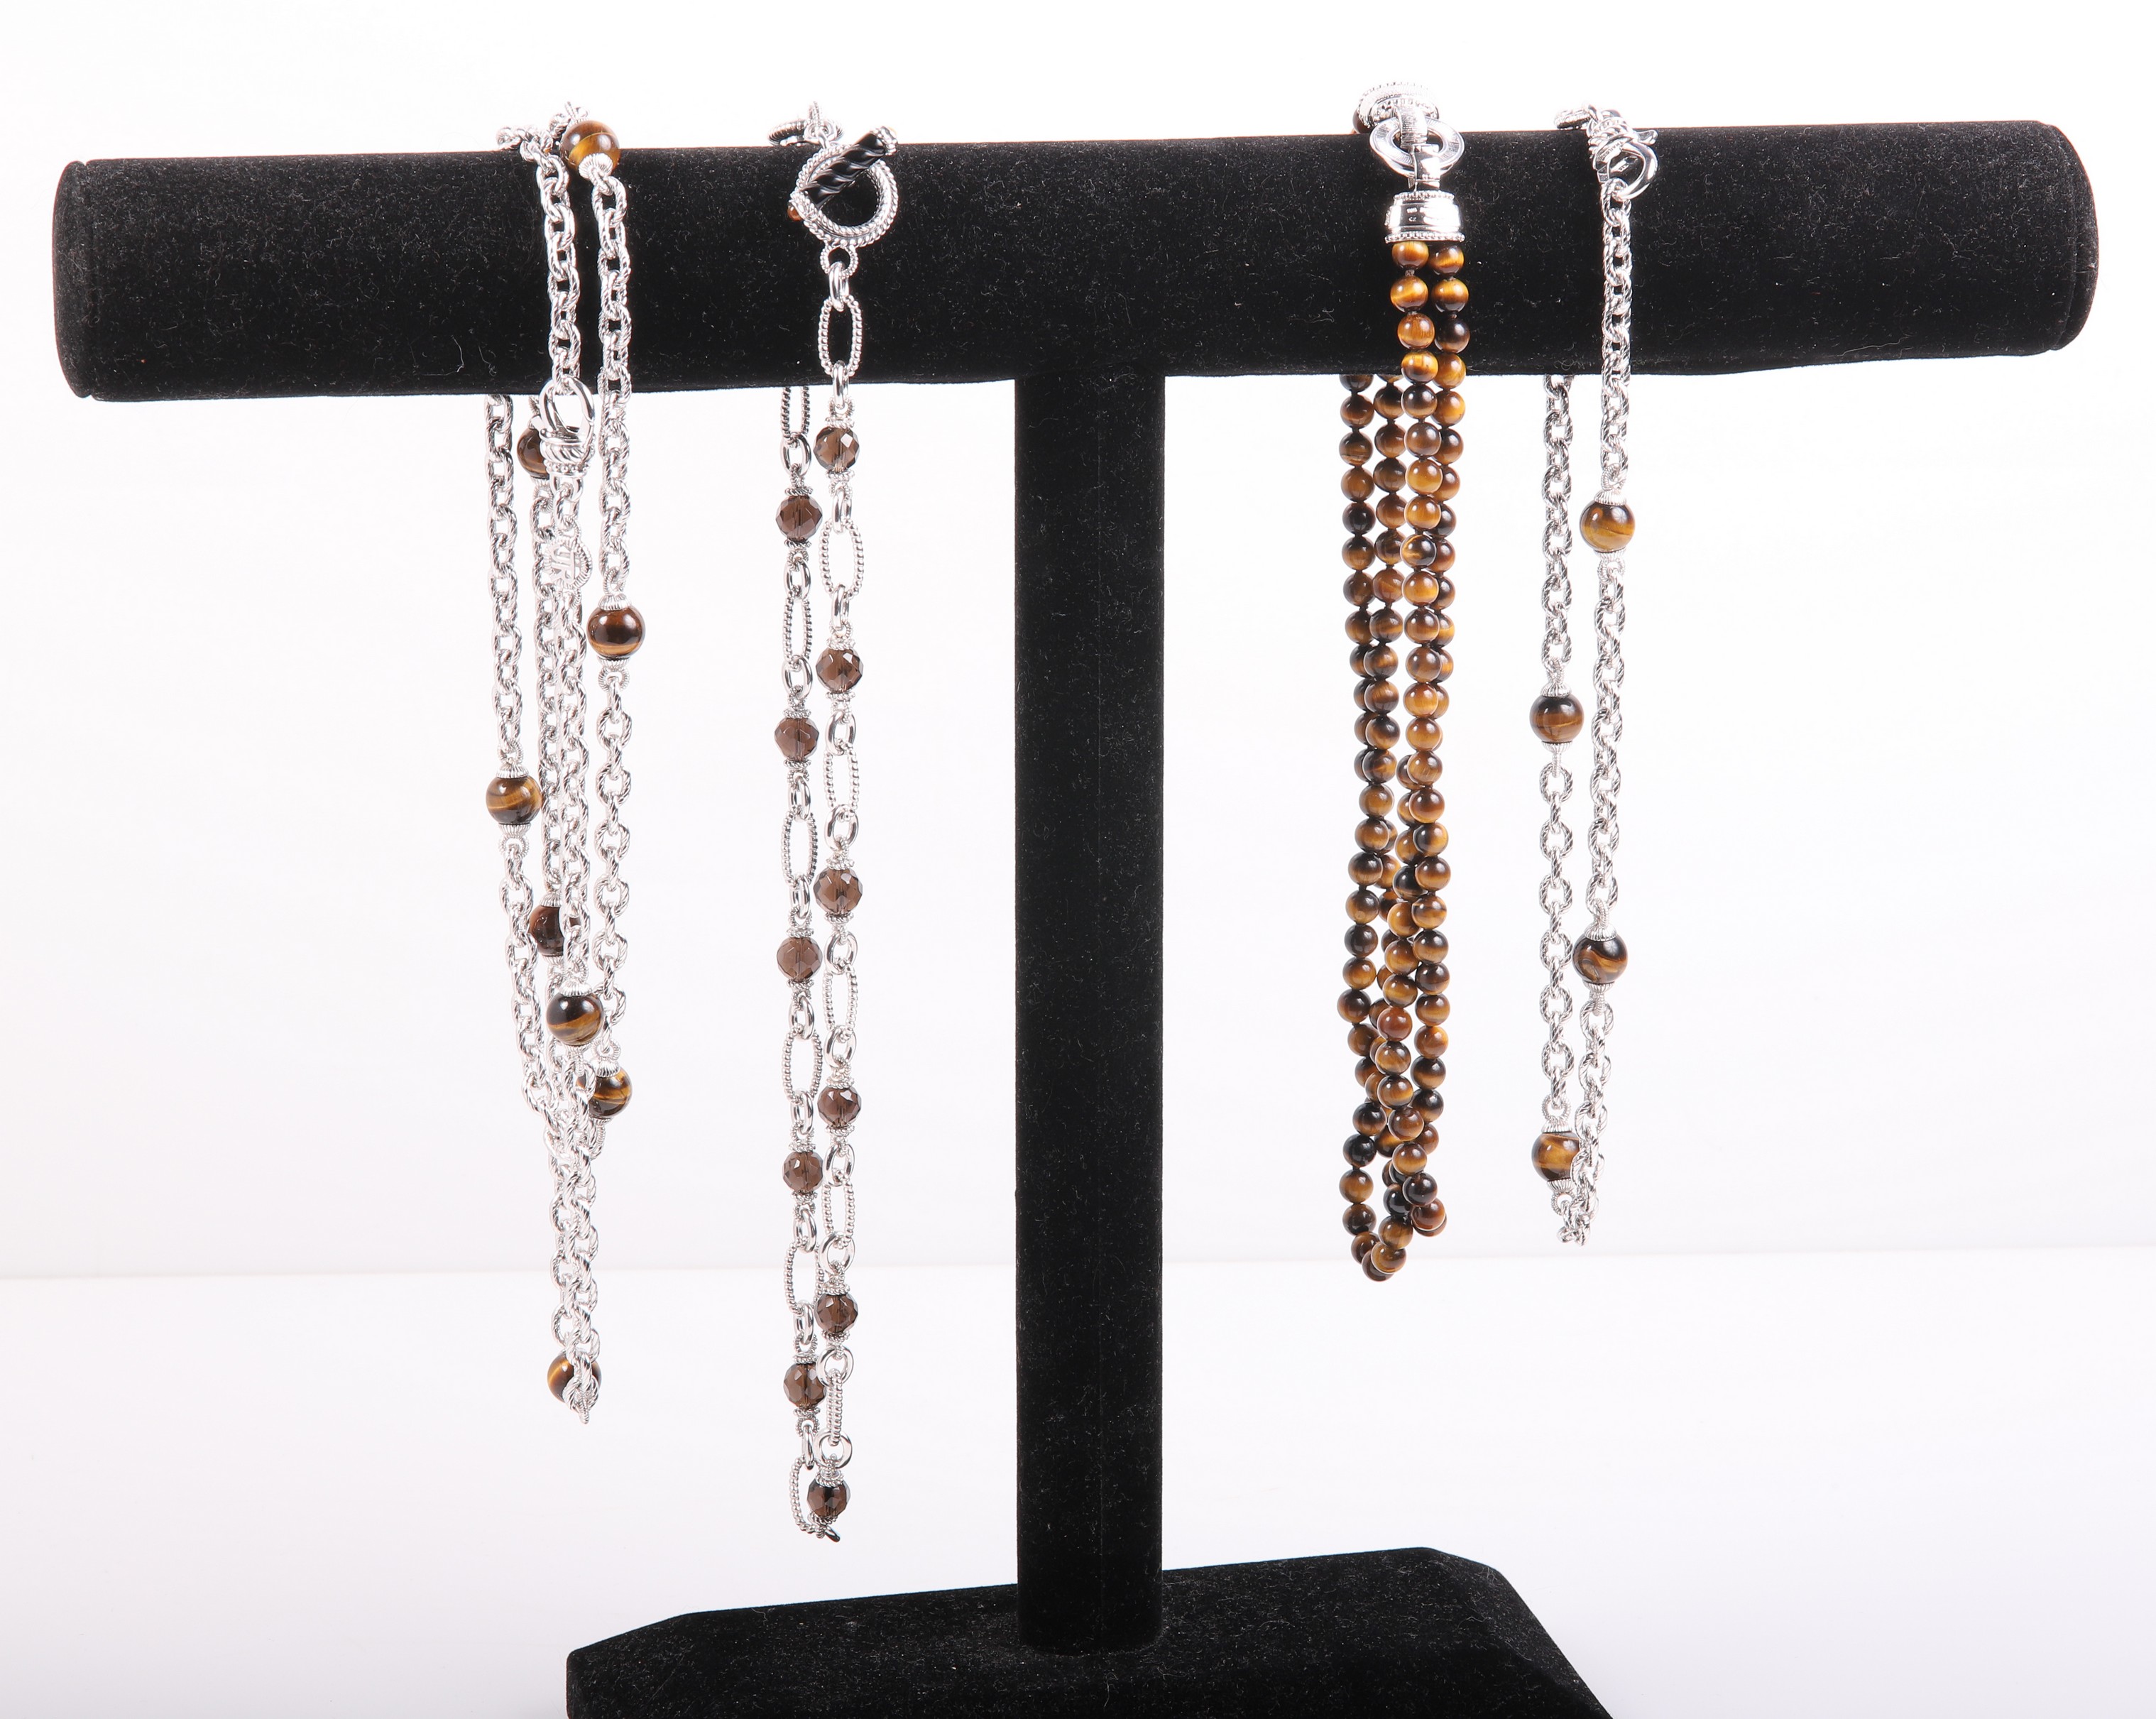  4 Sterling and tigers eye necklaces 2e1308